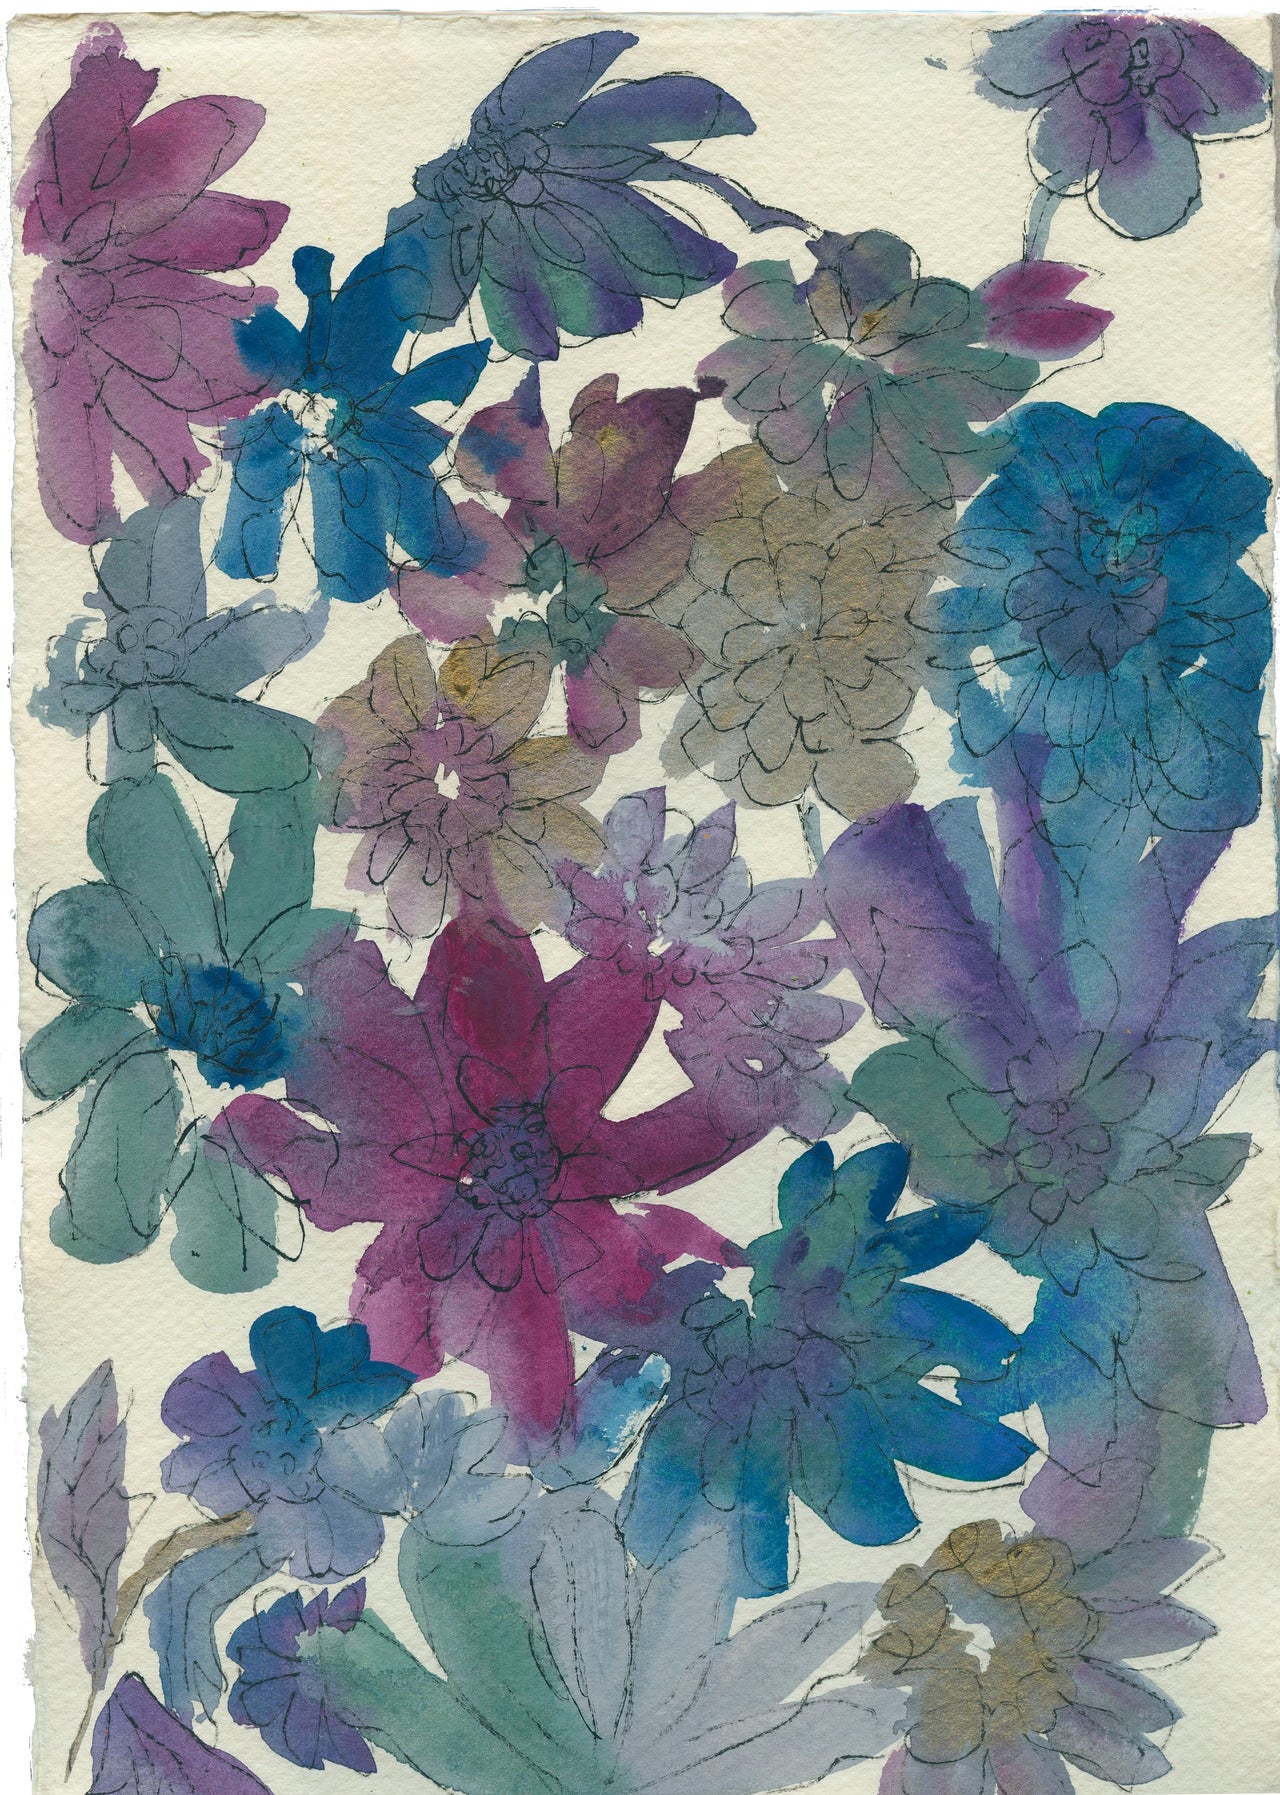 Artist Lucy Williams ink painting of flowers in tones of blue, purple.